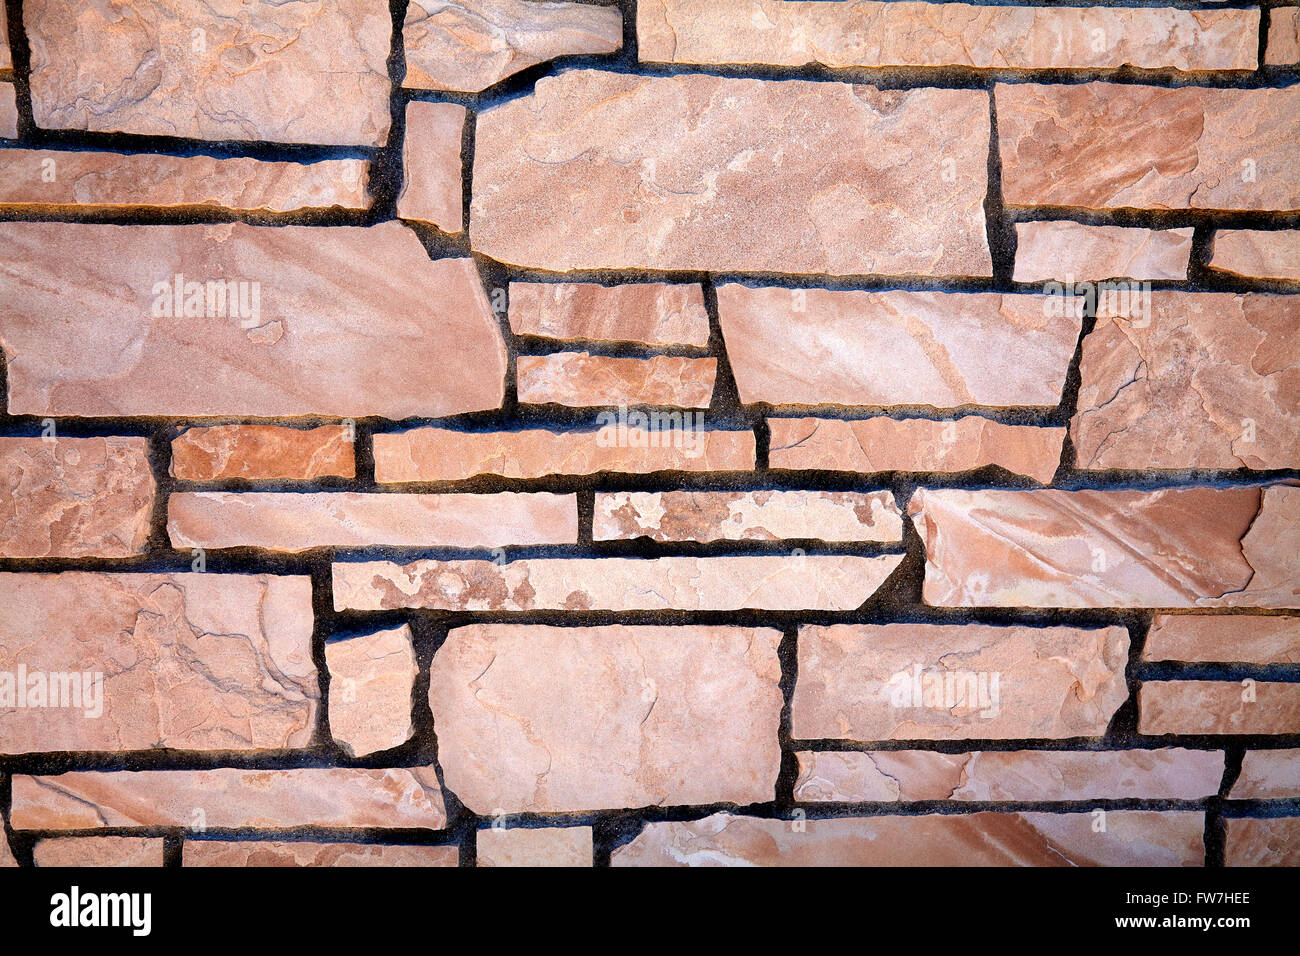 stone natural rock veneer wall and building finish design and pattern closeup for construction industry and manufacturing Stock Photo